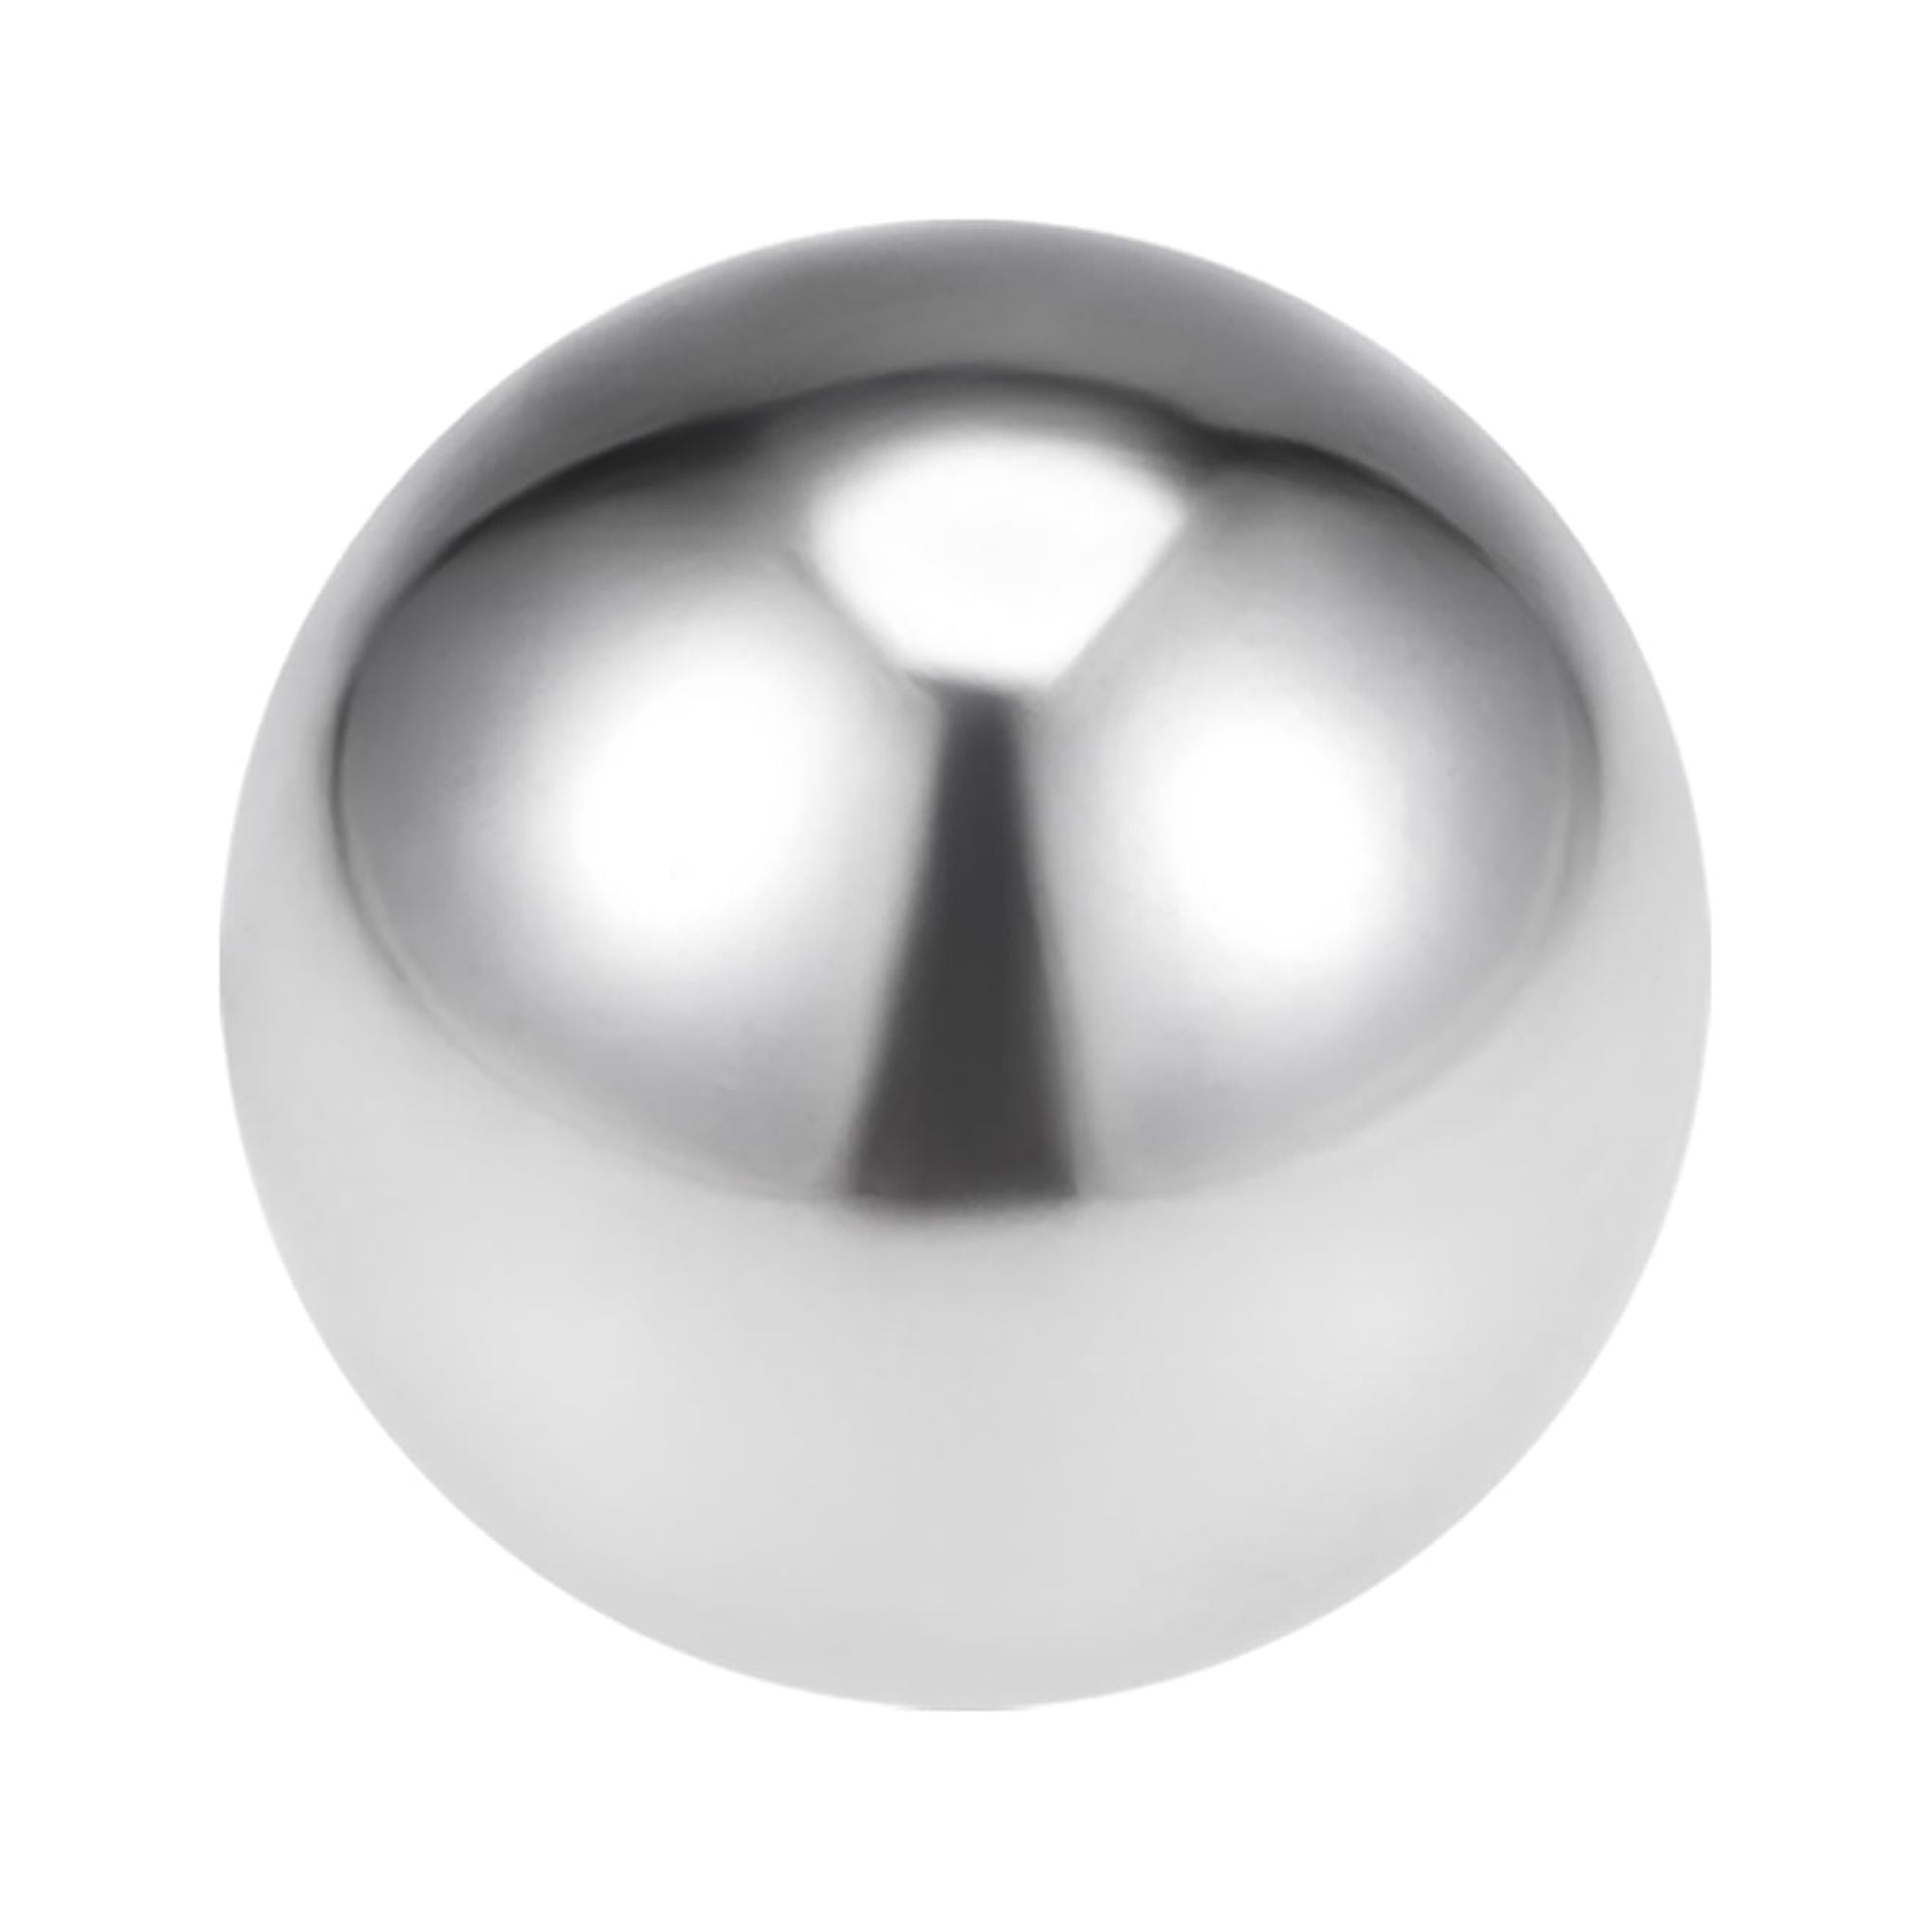 Uxcell 27mm/1.06 Bearing Balls, 304 Stainless Steel G100 Precision Ball 